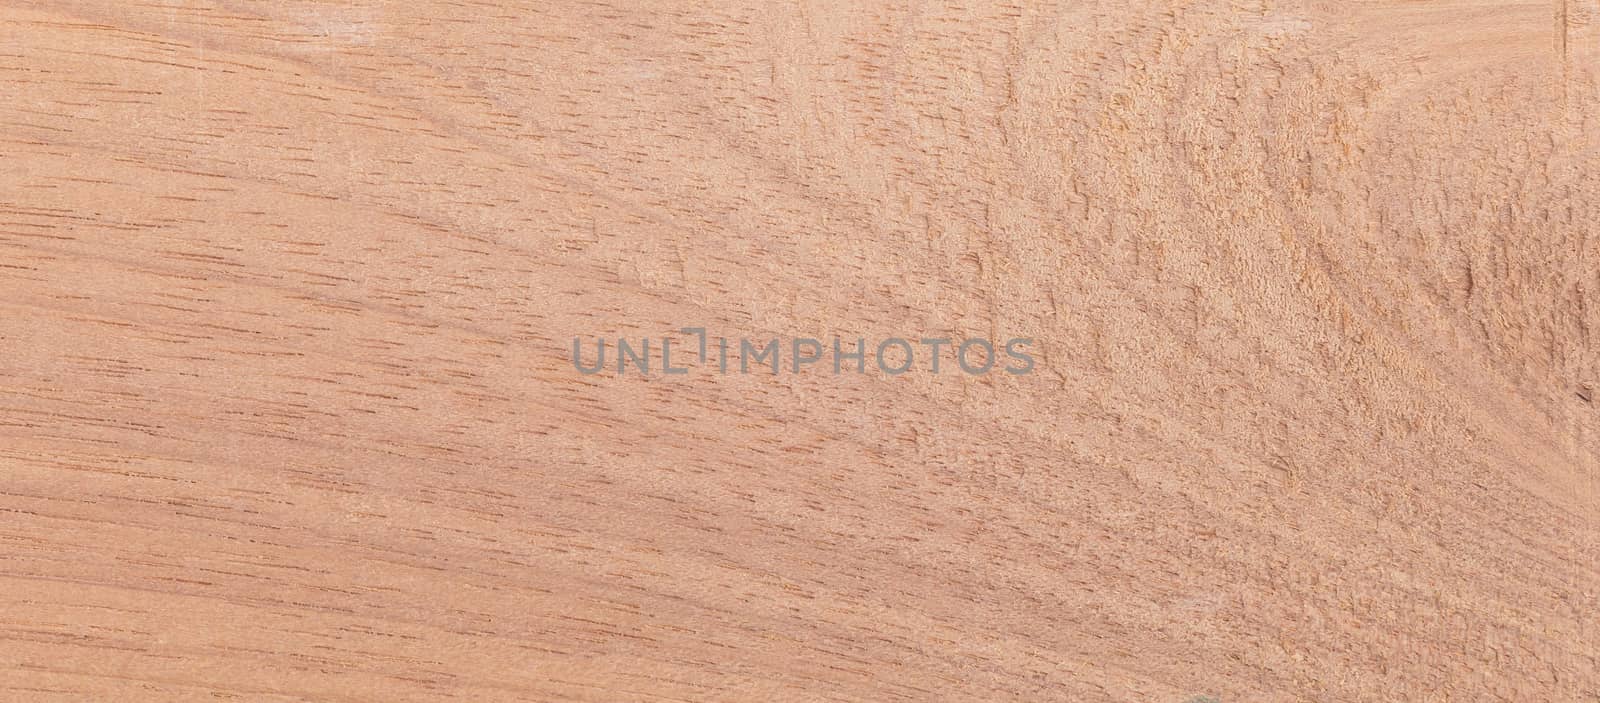 Wood from the tropical rainforest - Suriname - Couratari spp by michaklootwijk